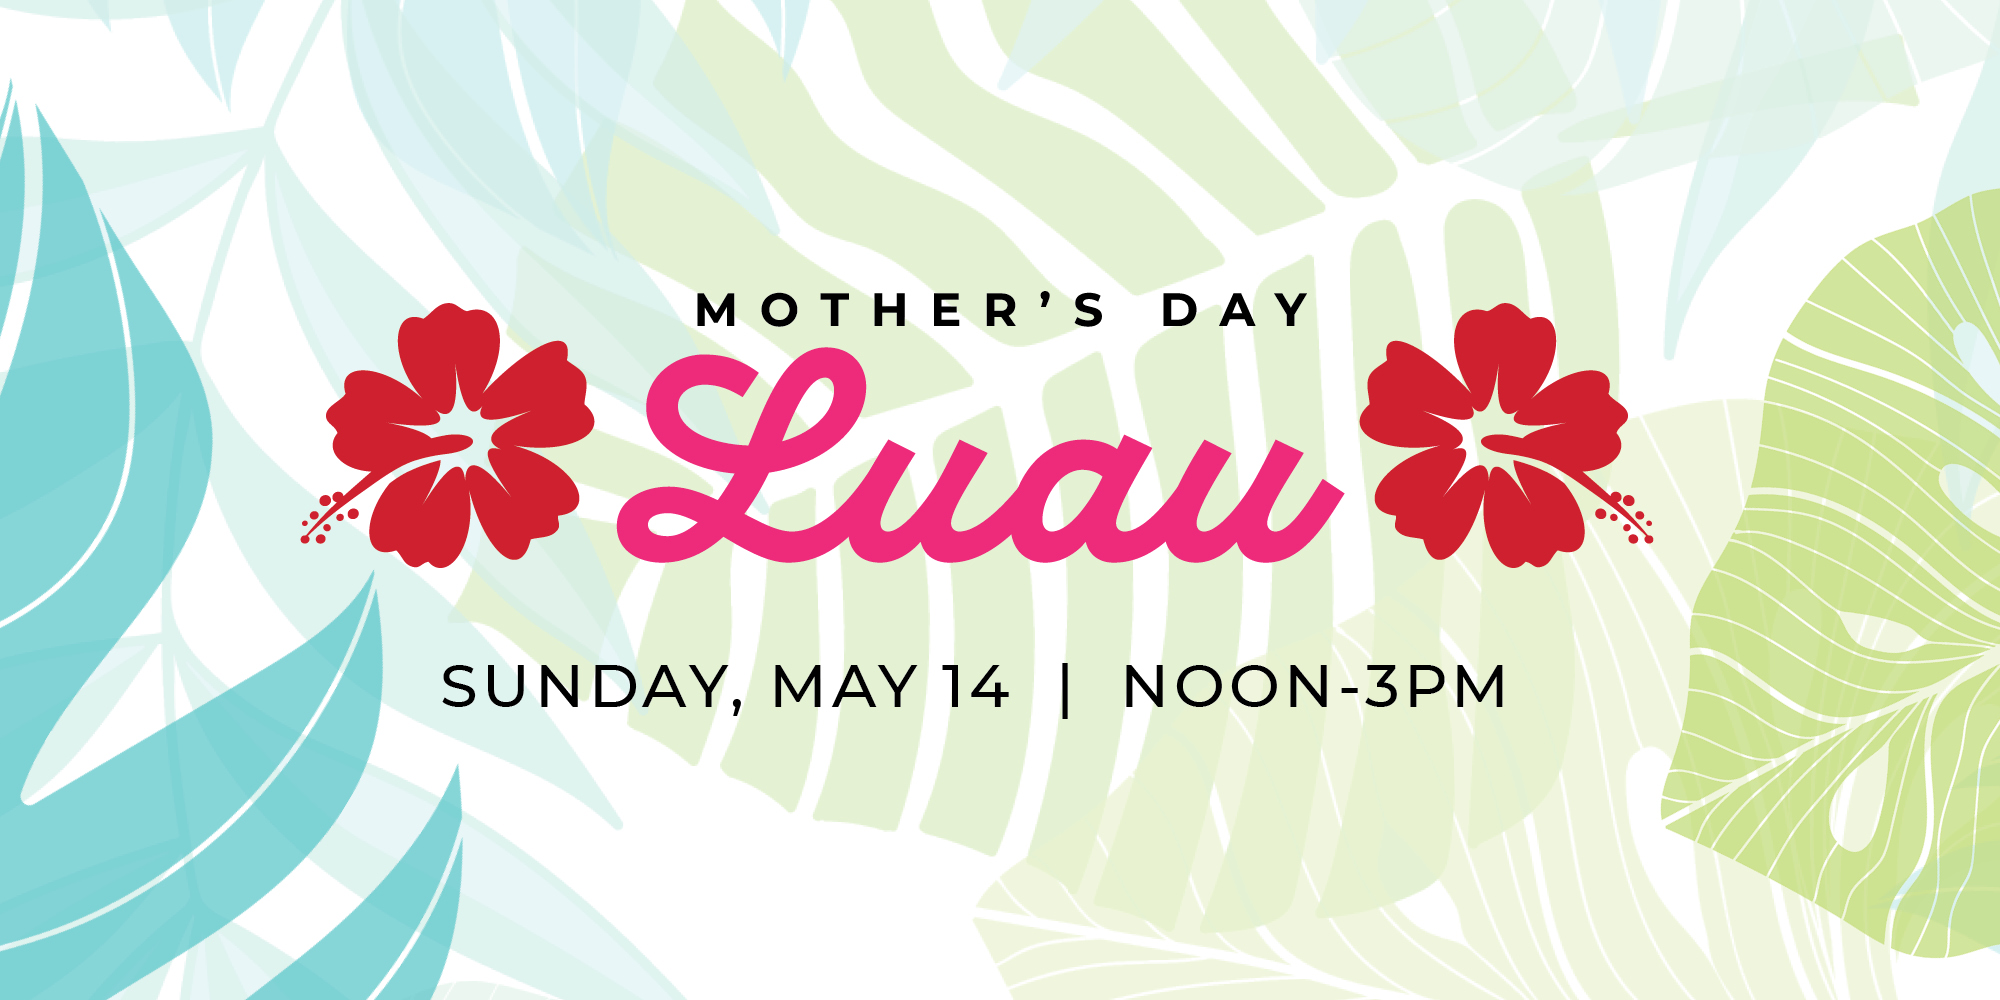 Mother's Day Luau - Sunday May 14th - Noon - 3PM